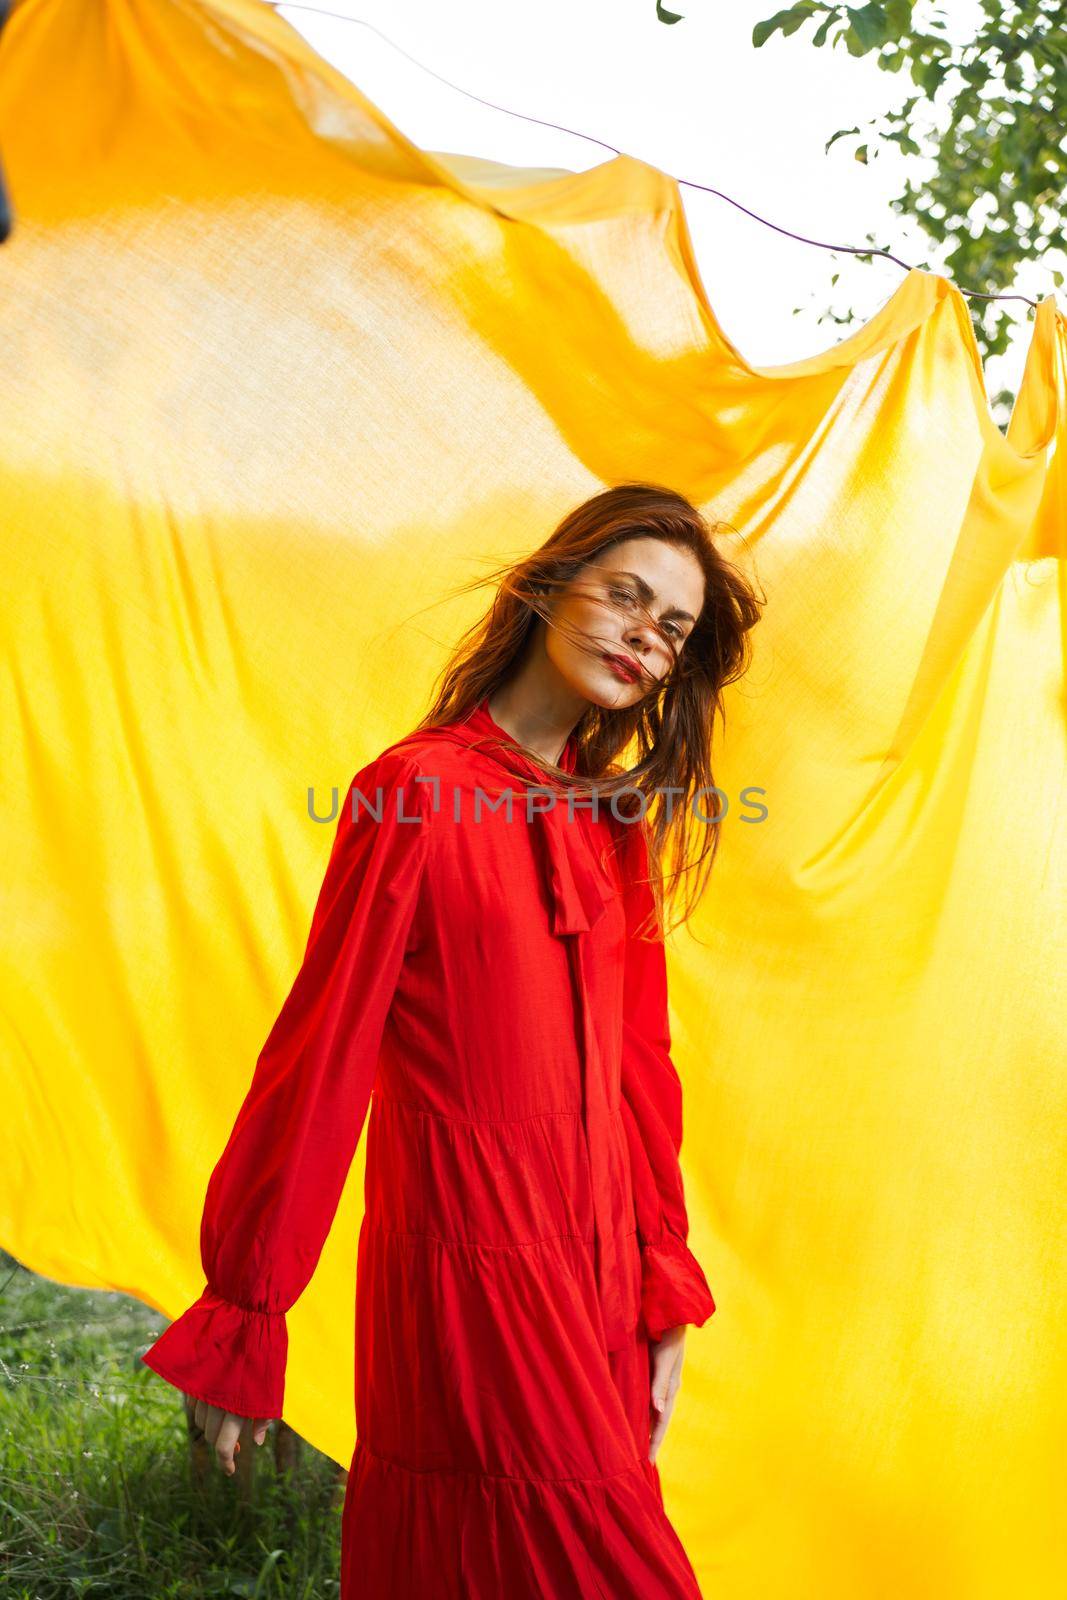 smiling woman in red dress posing yellow background by Vichizh